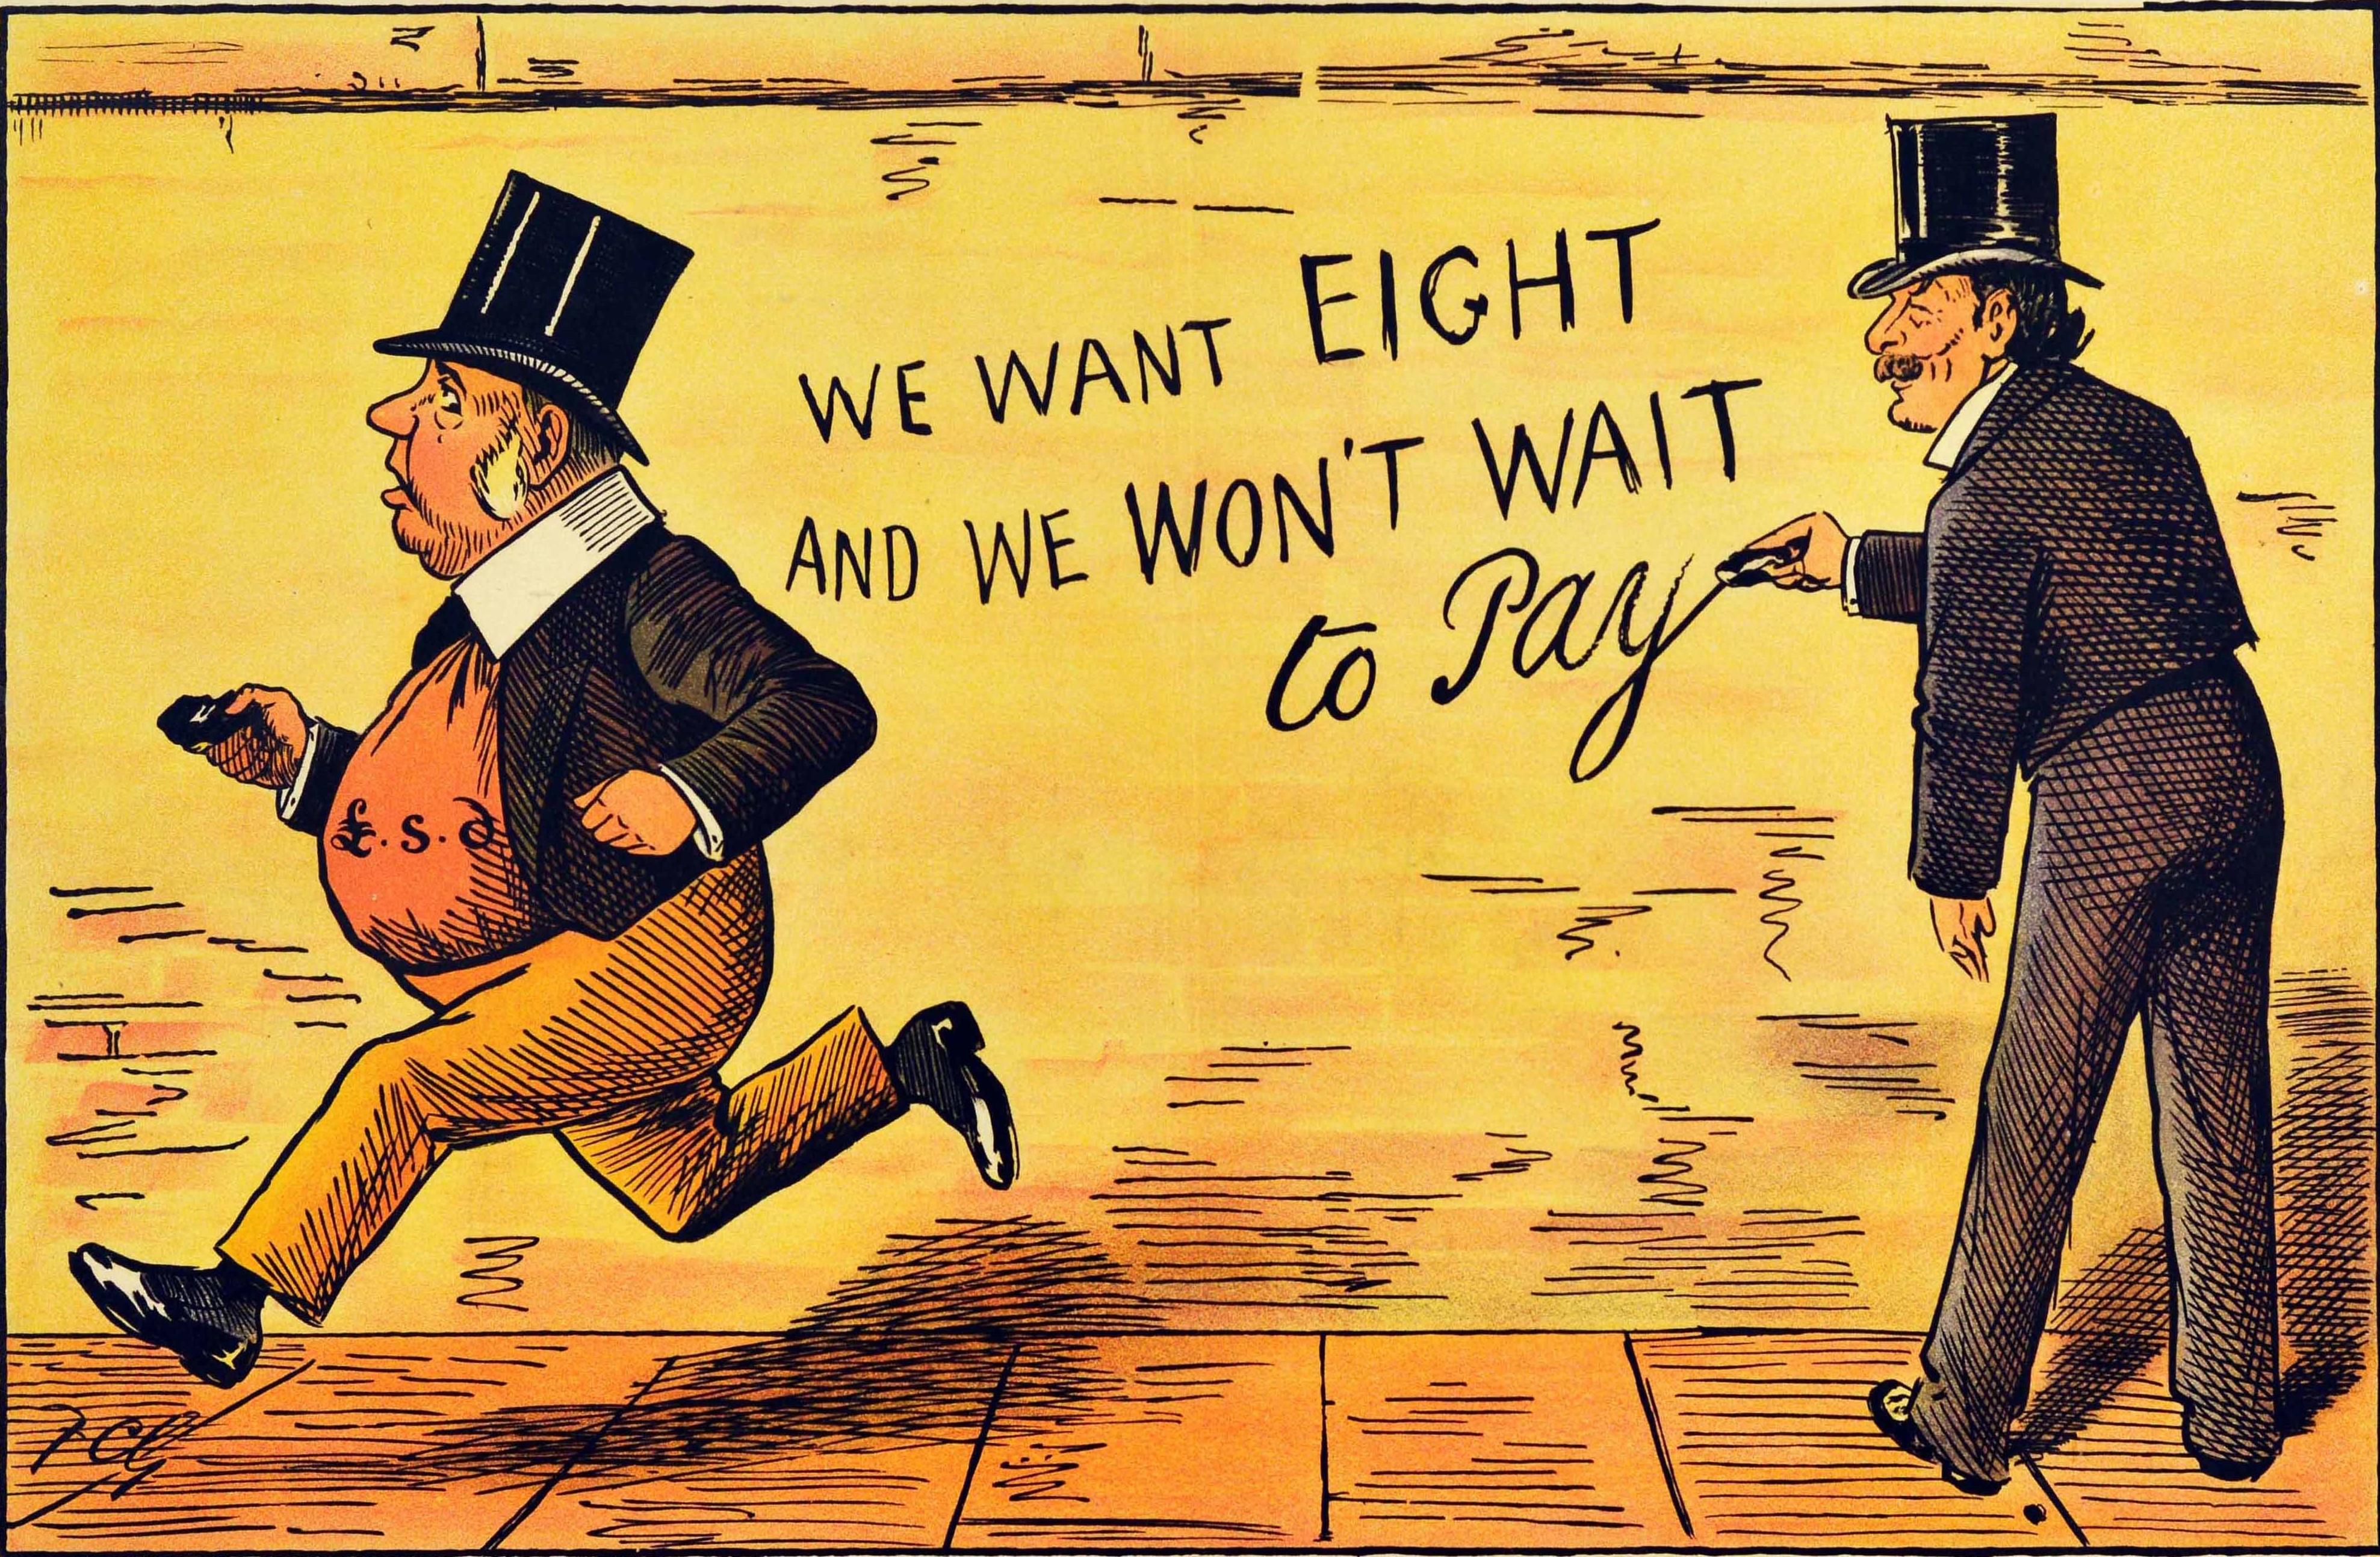 Original antique political election propaganda poster issued by the Liberal Party - A Little Omission - featuring a man wearing a suit with the British pound sterling and shillings symbols on his front and holding a piece of chalk in his hand after